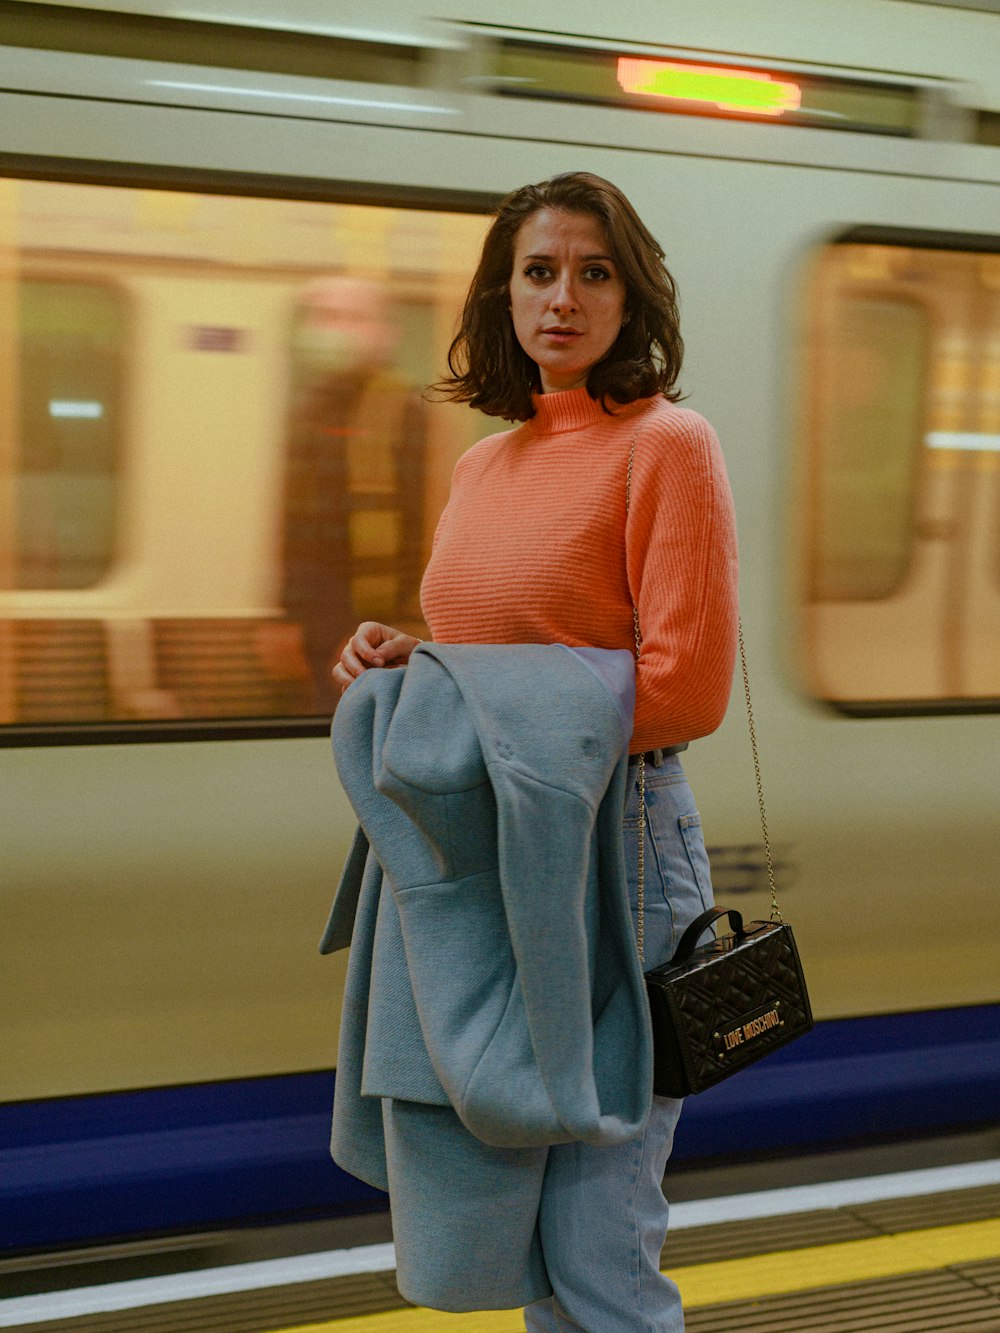 a woman standing on a train platform with a purse in her hand